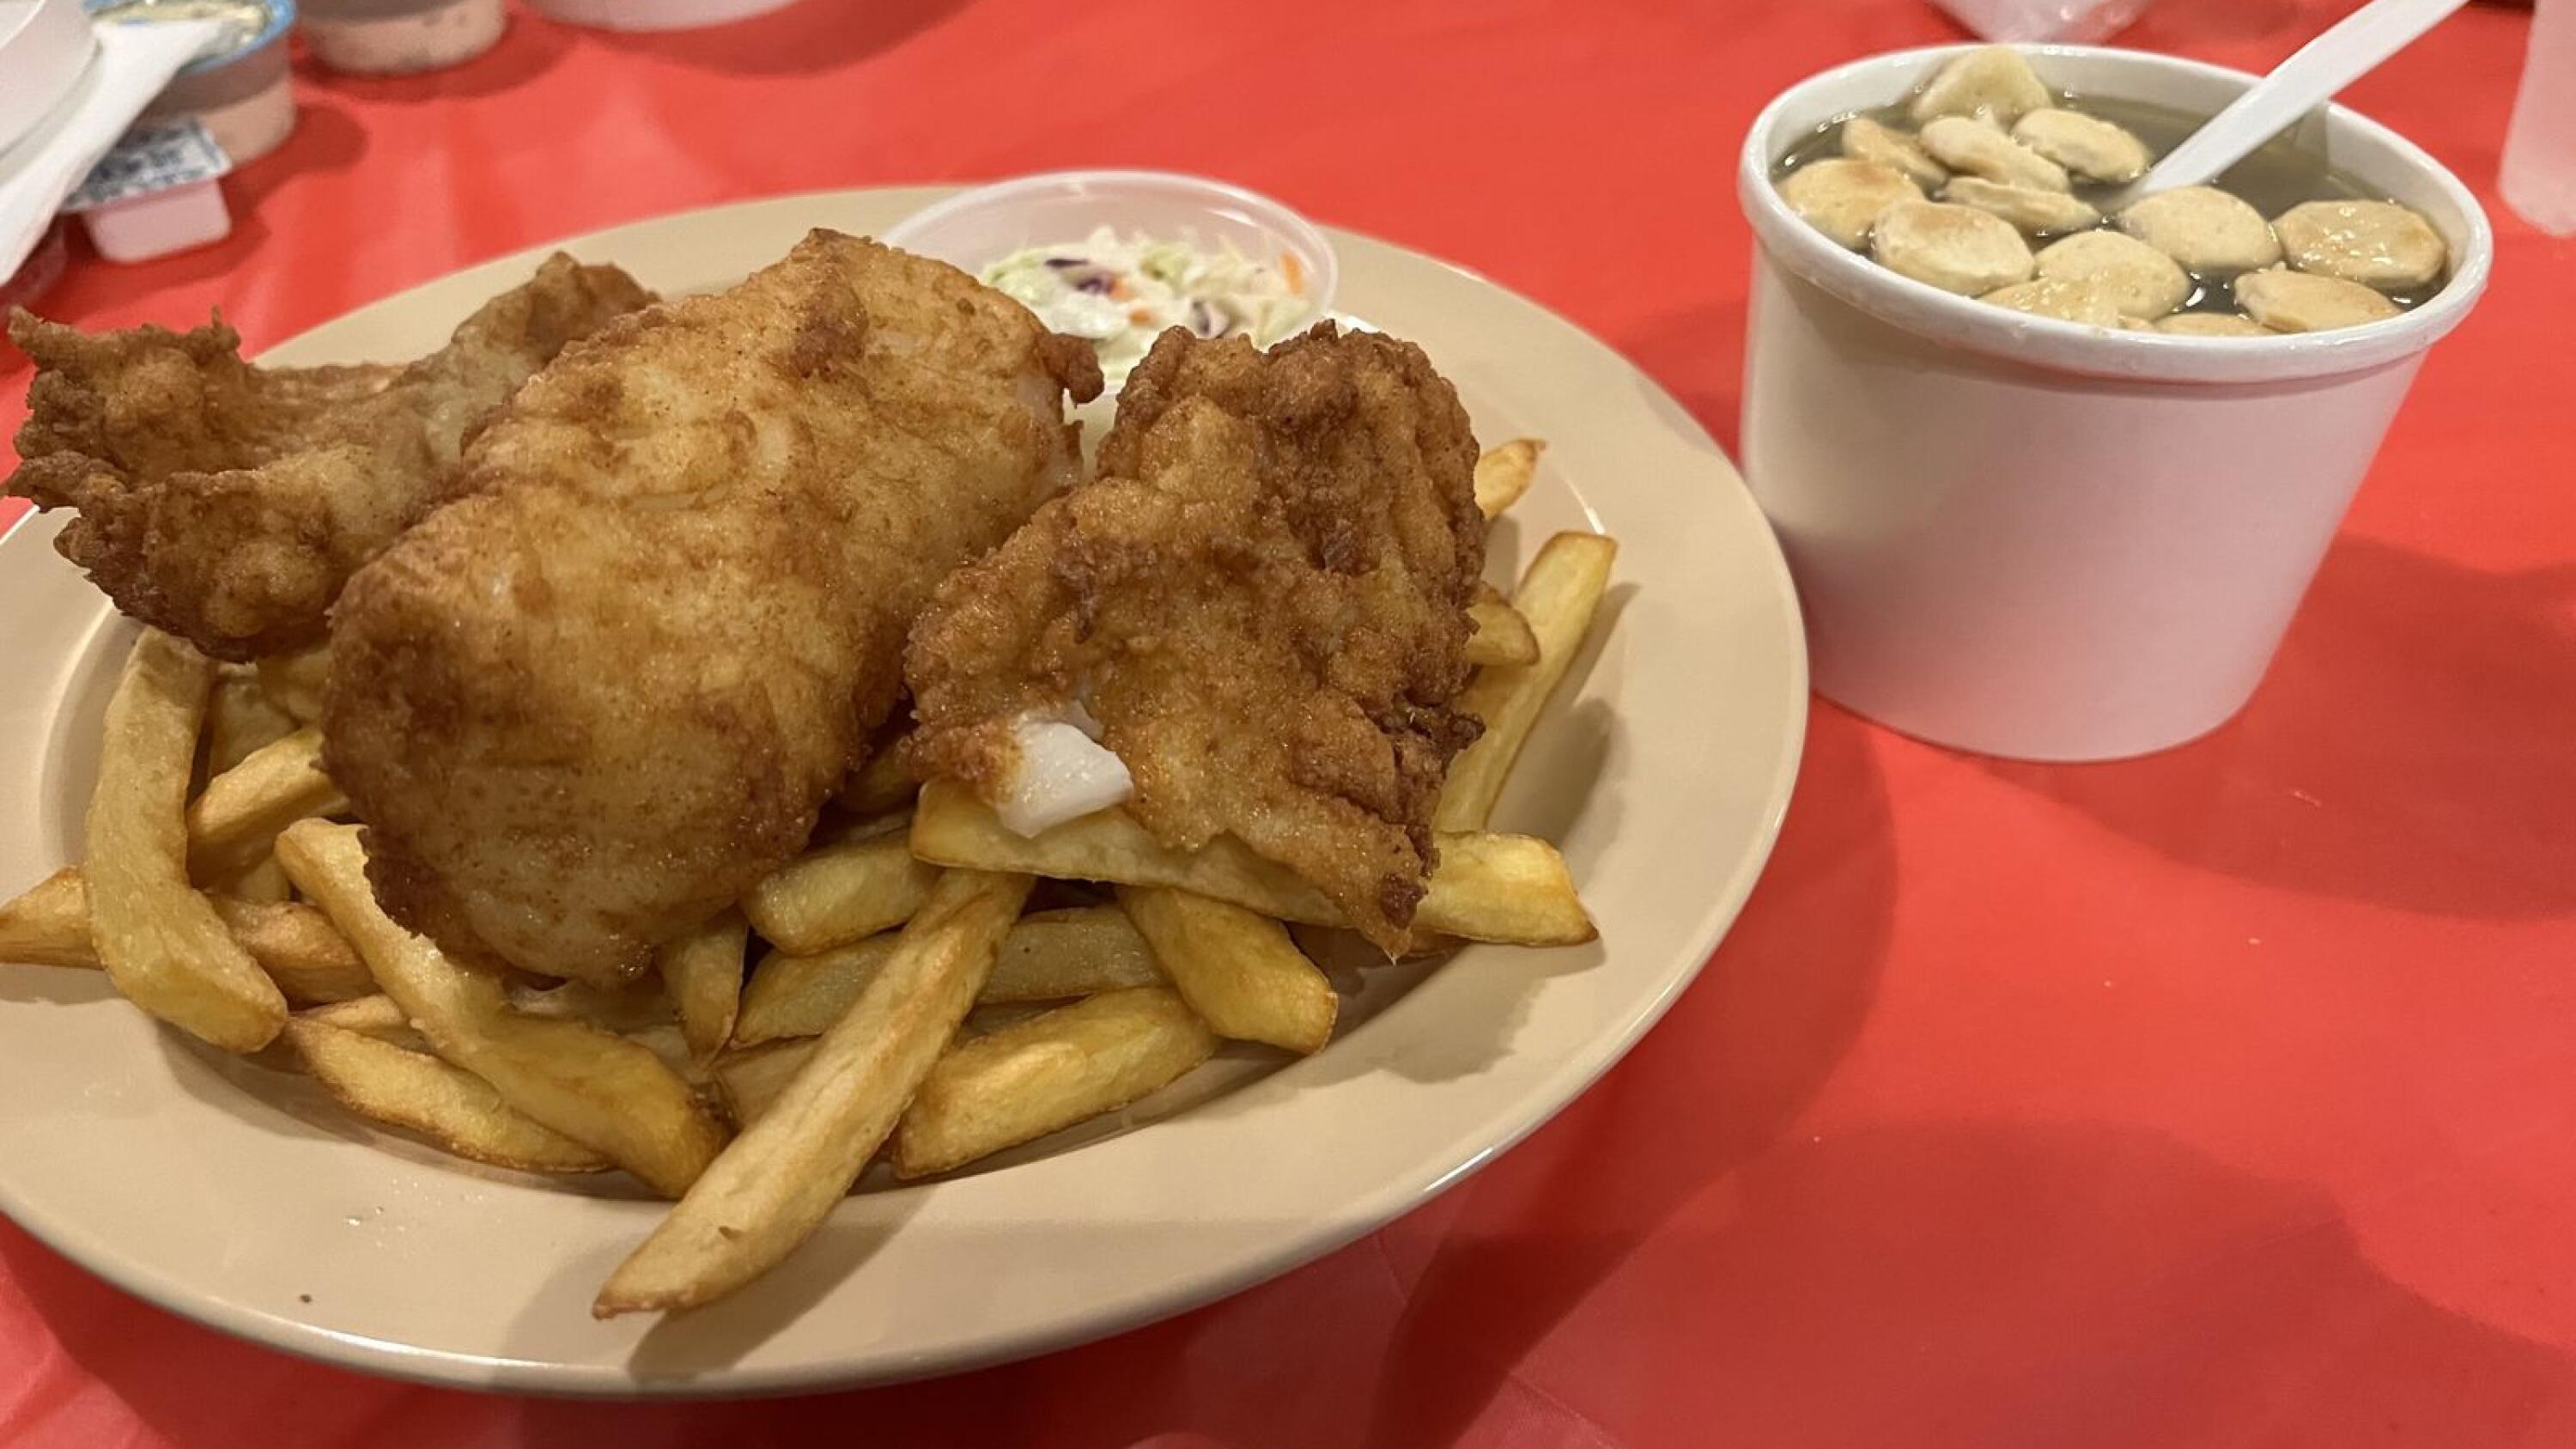 Review: Lenten fish fry tradition continues in Stonington